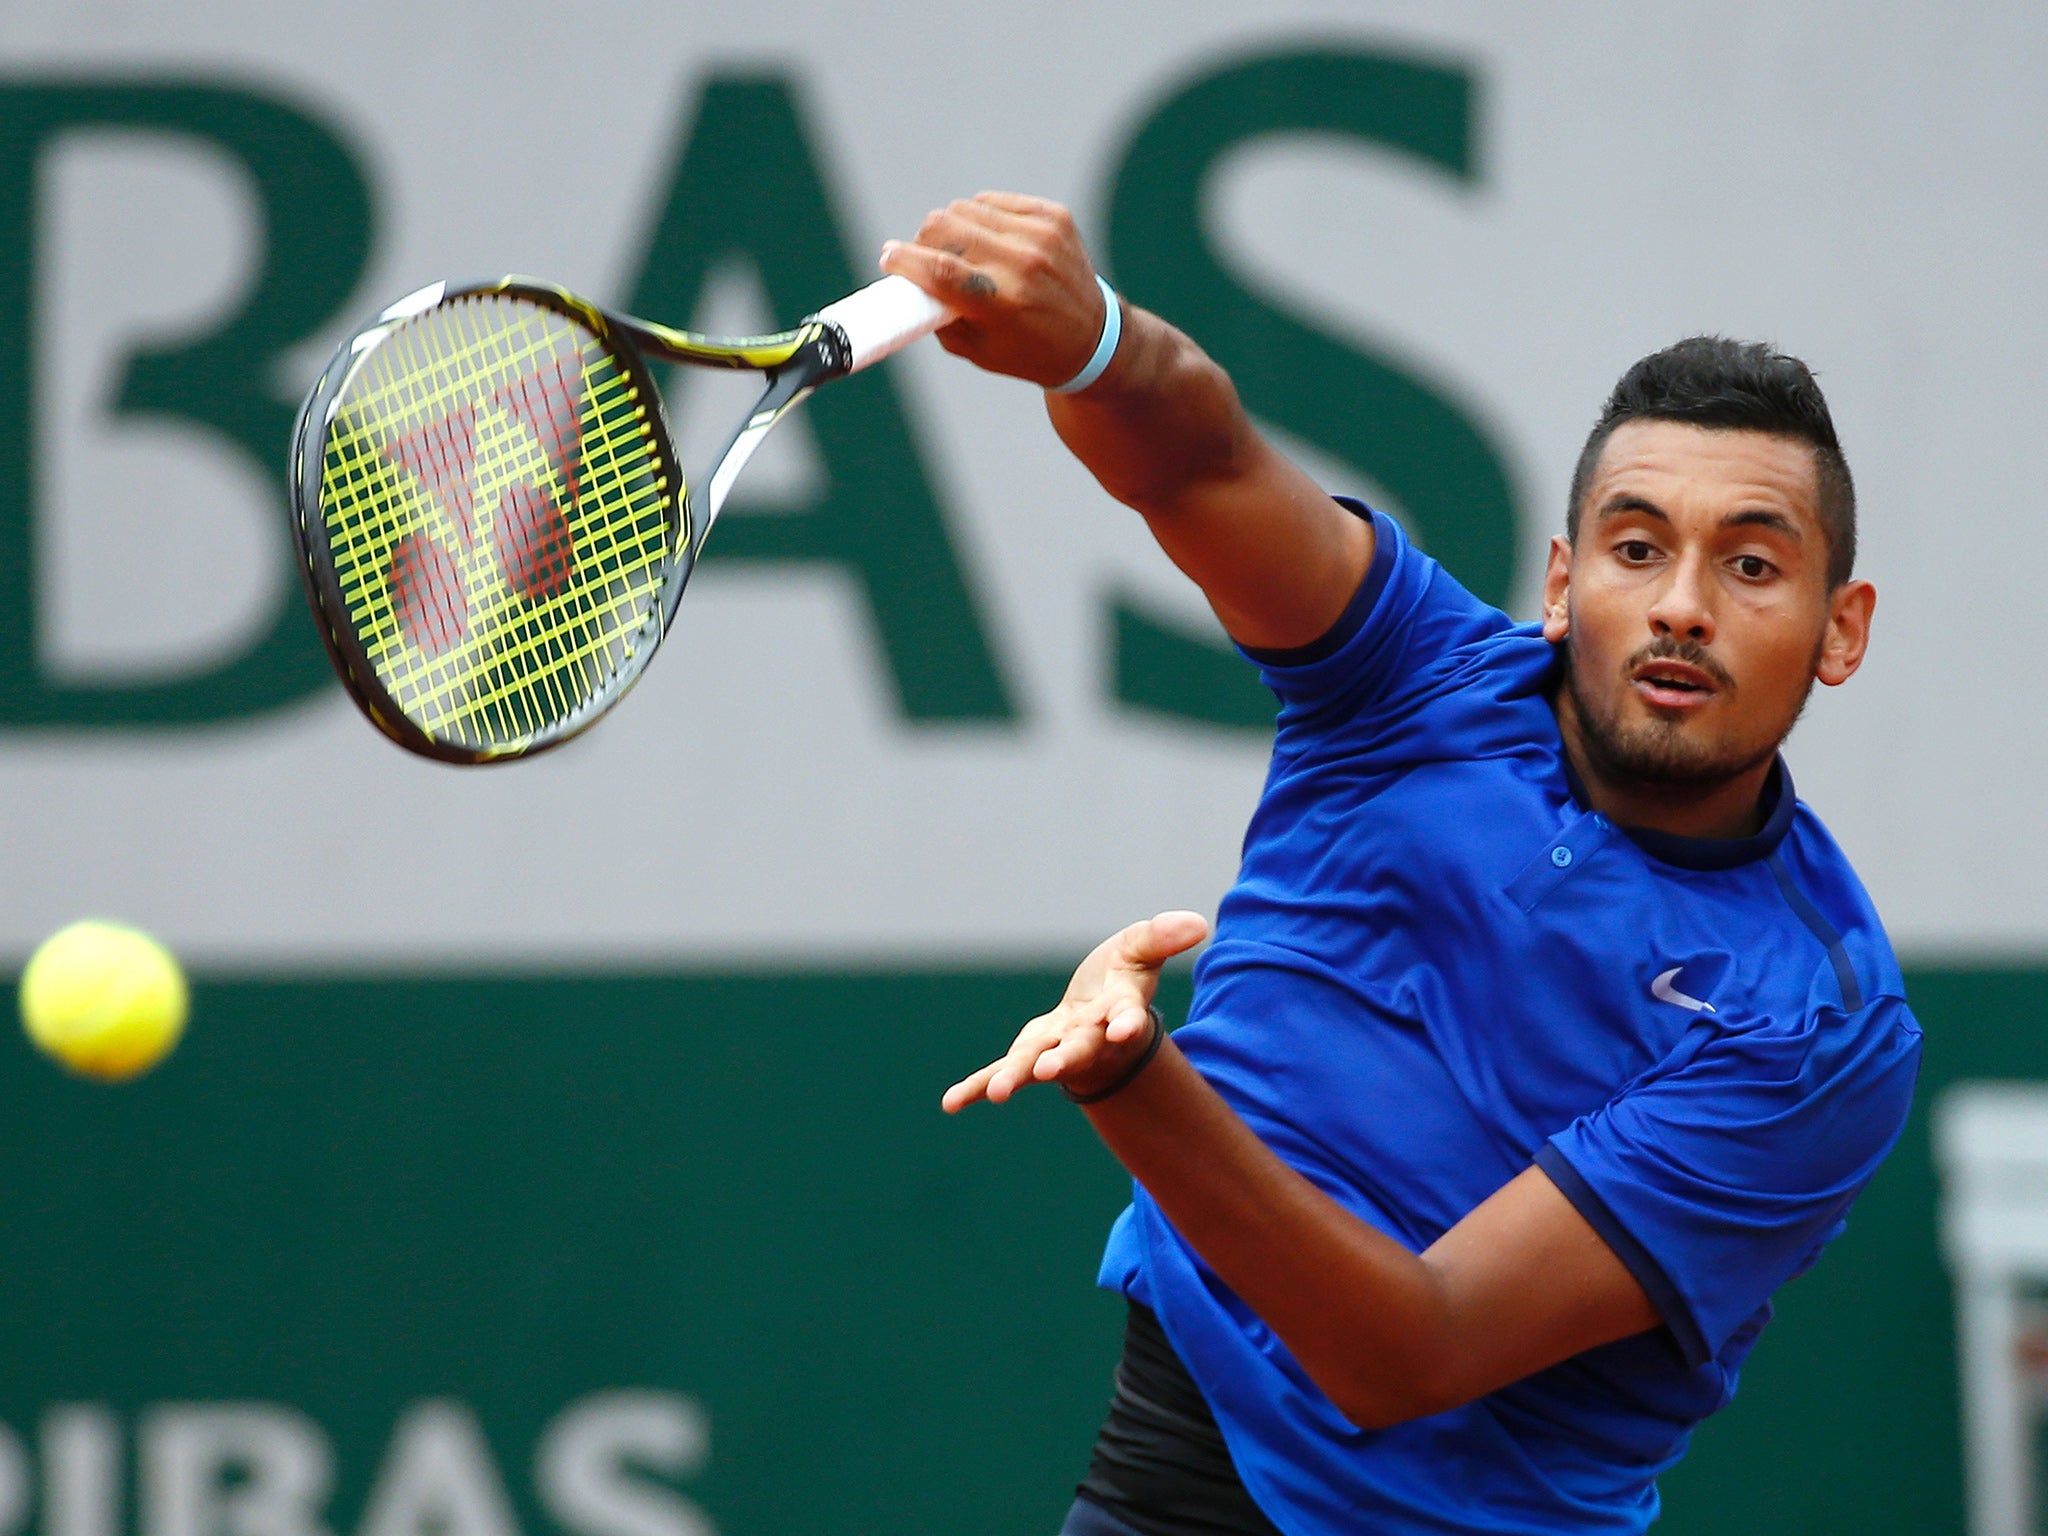 Kyrgios completed his victory after two hours and 21 minutes